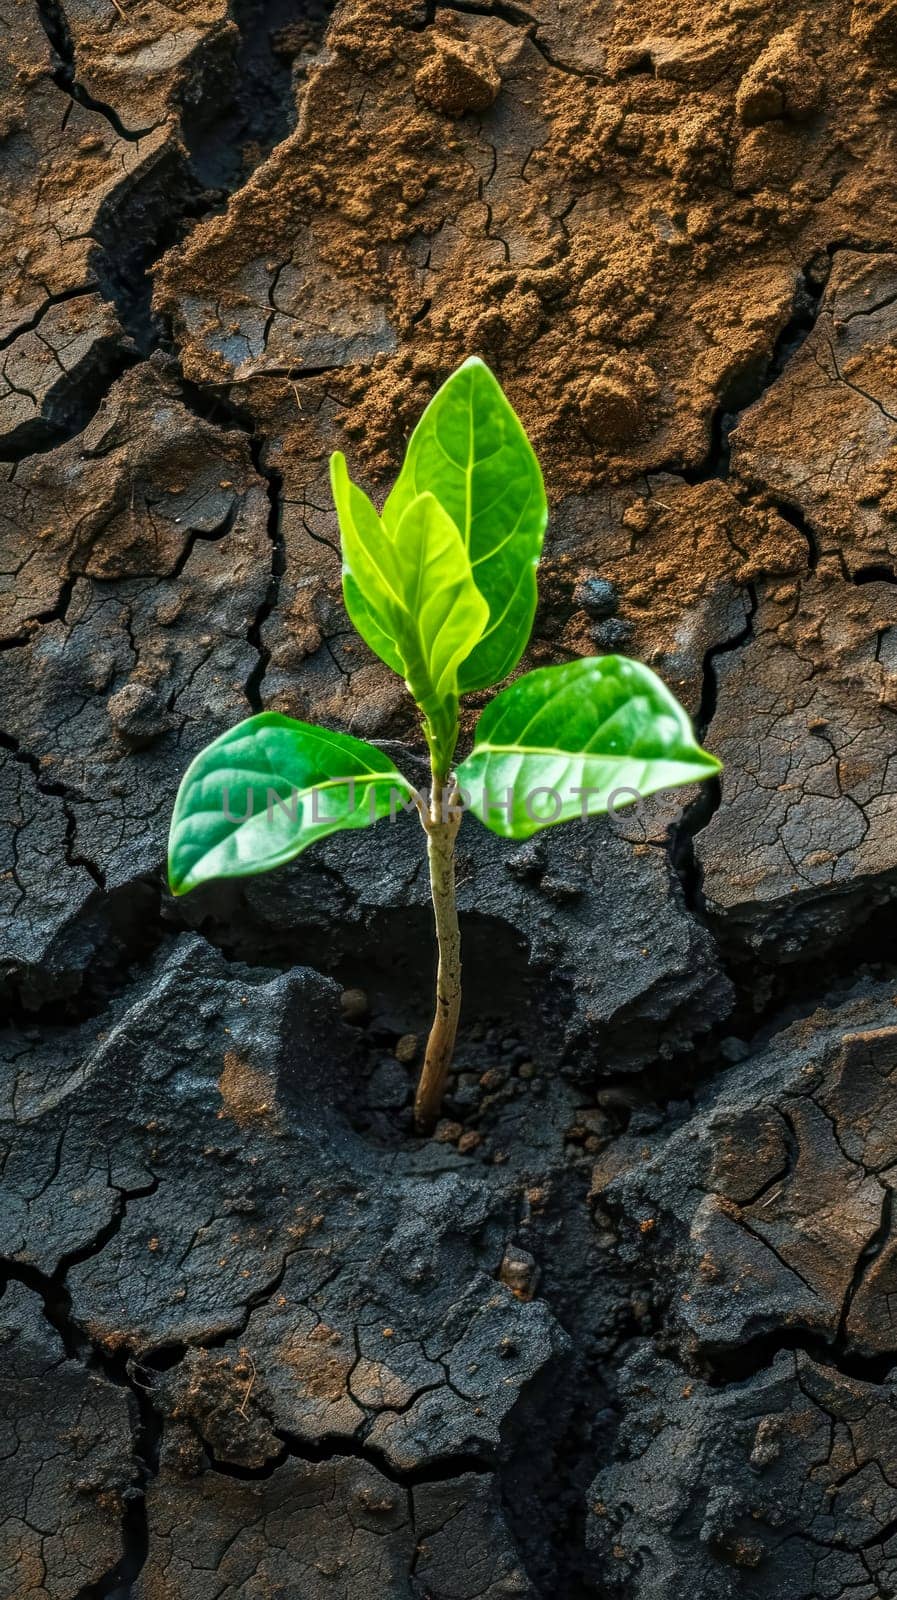 young, vibrant green plant sprouting from a parched, cracked earth, symbolizing hope, resilience, and the power of life to persist in the harshest conditions. by Edophoto